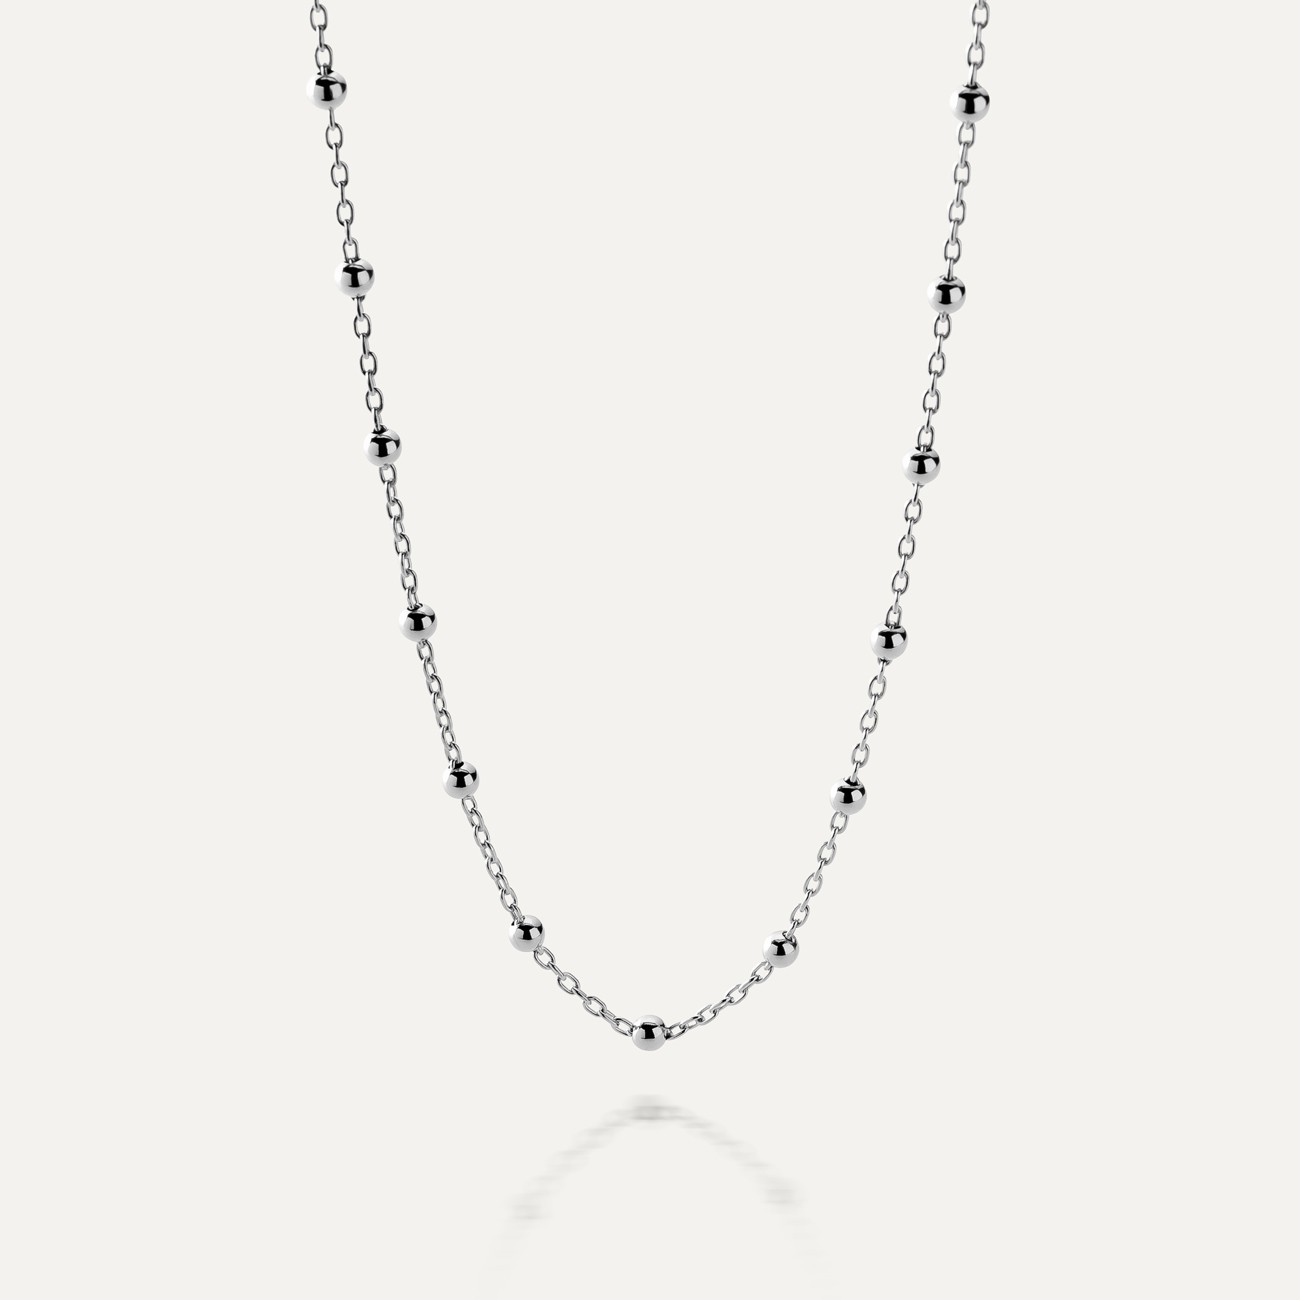 LIGHT SILVER NECKLACE 45-55 CM, RHODIUM PLATED